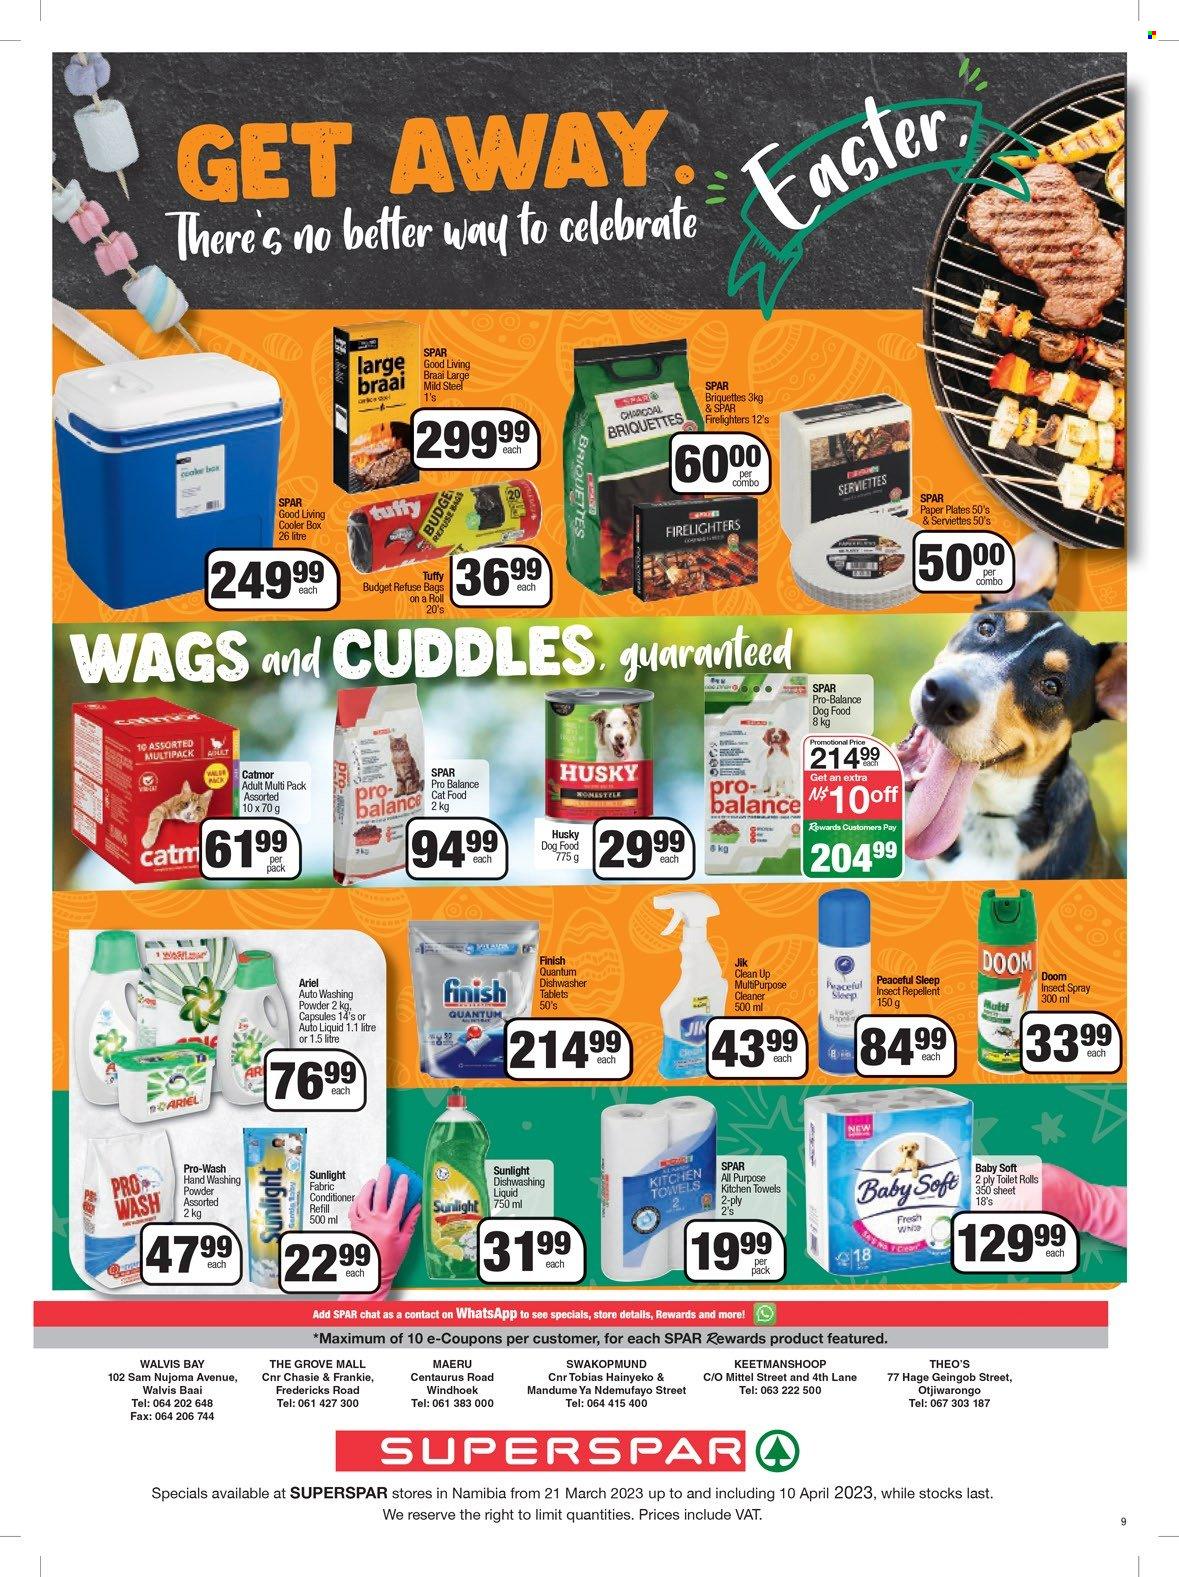 thumbnail - SPAR catalogue  - 27/03/2023 - 10/04/2023 - Sales products - Baby Soft, toilet paper, kitchen towels, cleaner, Ariel, laundry powder, Sunlight, dishwashing liquid, dishwasher cleaner, Finish Powerball, Finish Quantum Ultimate, dishwasher tablets, firelighter, serviettes, paper plate, briquettes, braai, charcoal, refuse bag. Page 2.